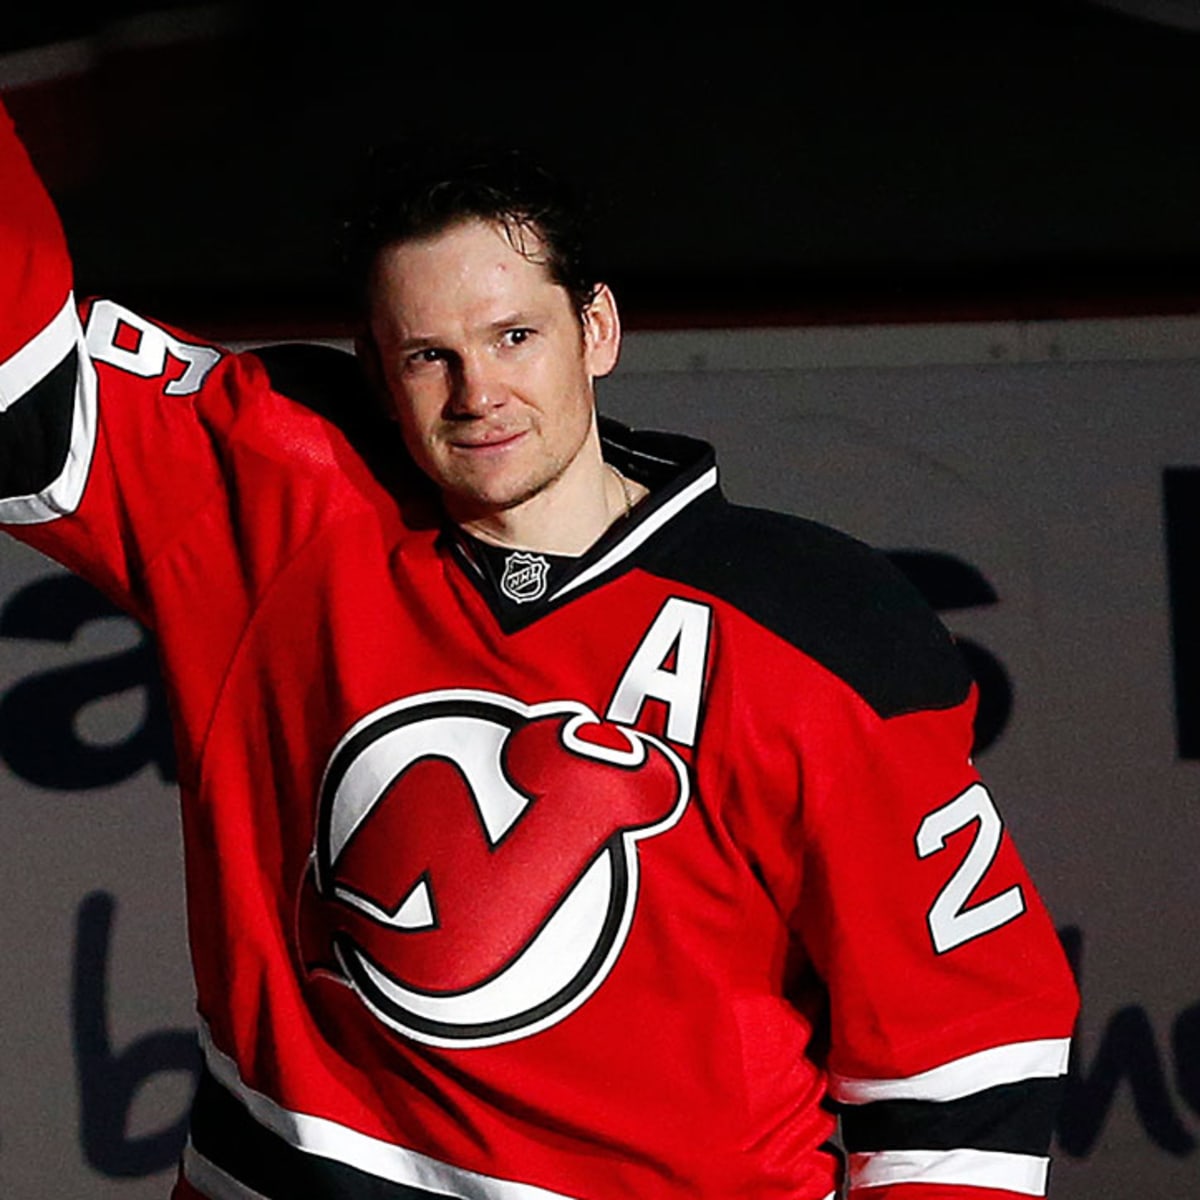 New Jersey Devils Patrick Elias during the NHL game between the